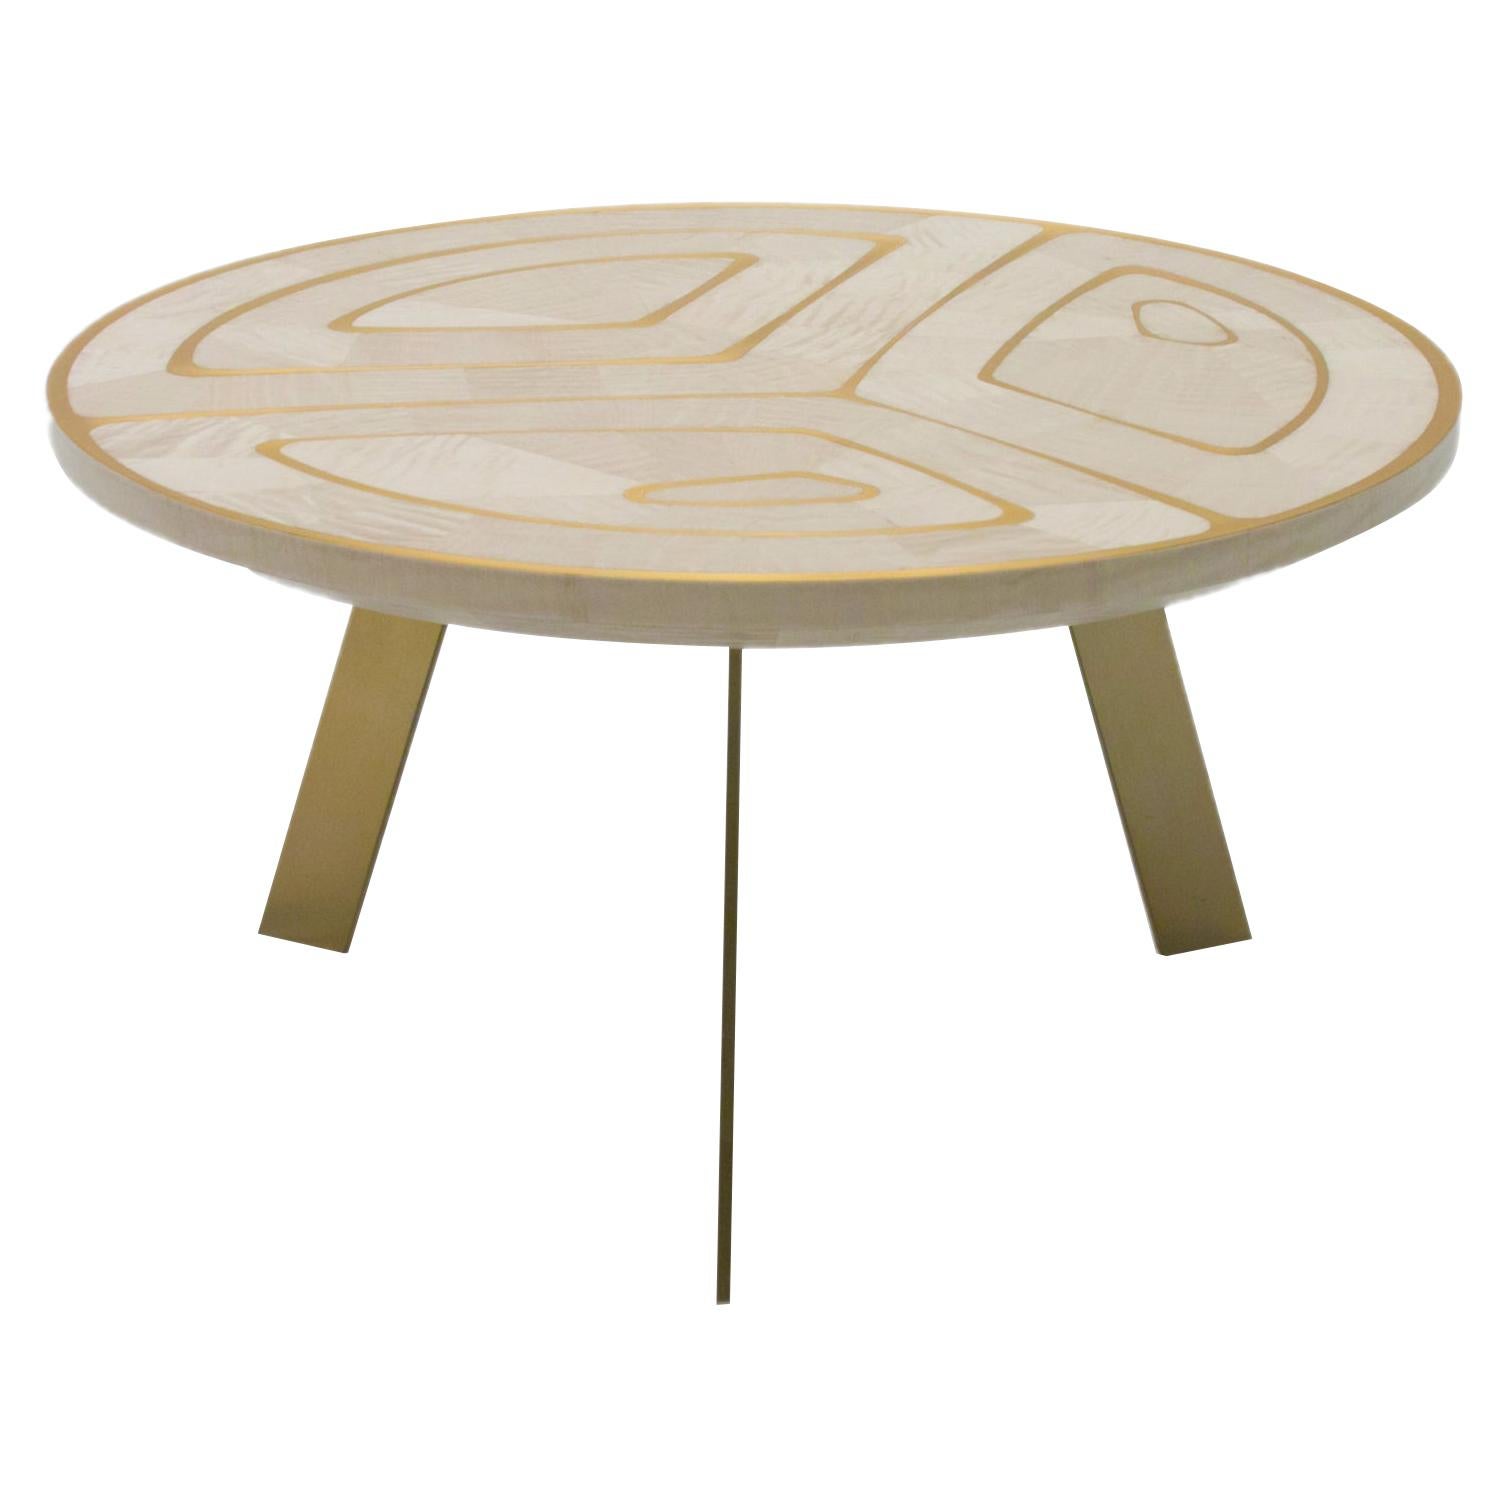 "Spanish Harlem" Gold and White Coffee Table by Ivan Paradisi, Italy